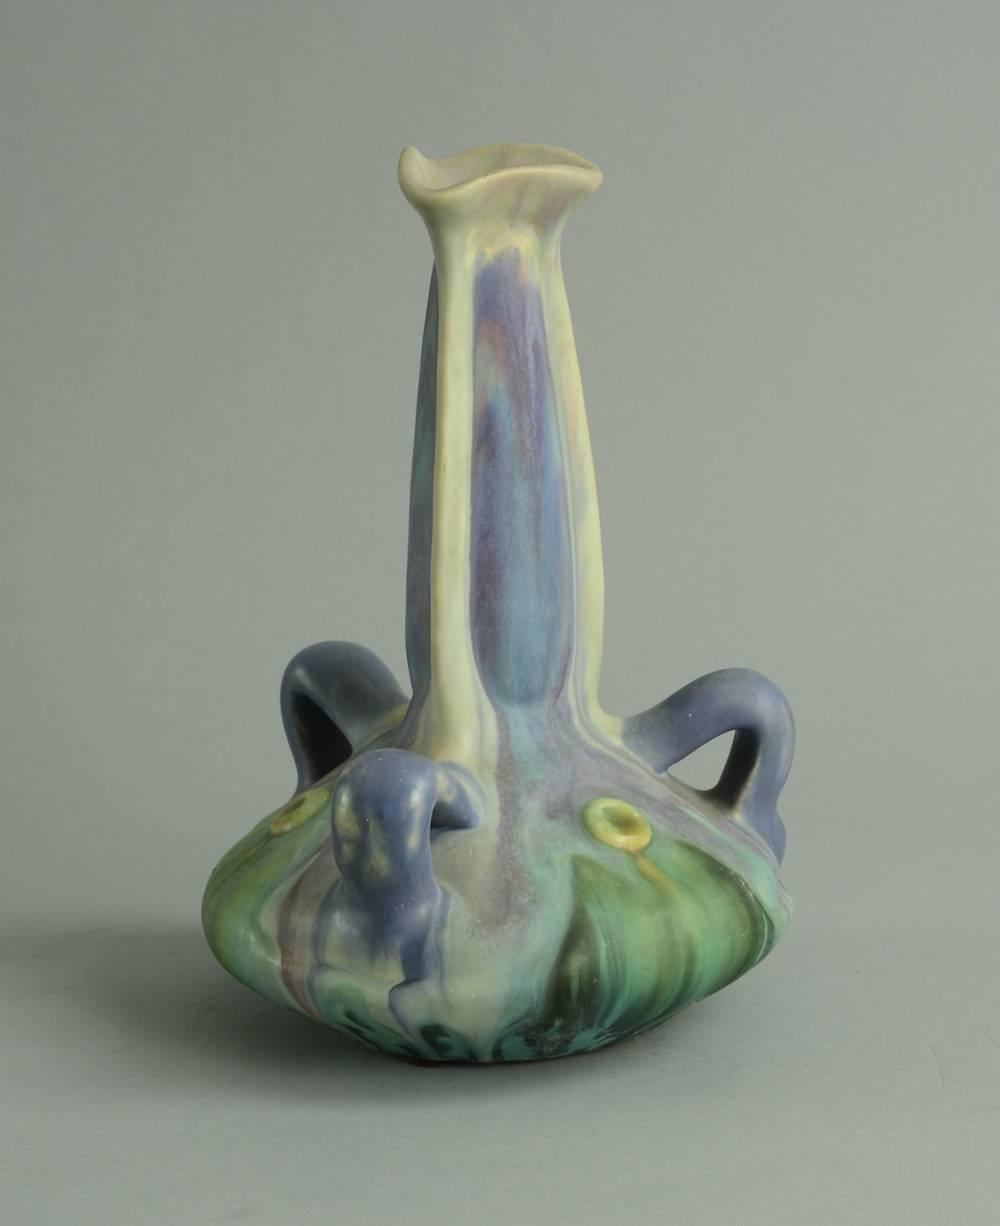 Stoneware vase with acid treated satin matte glaze in blue, purple, green and white, circa 1900.